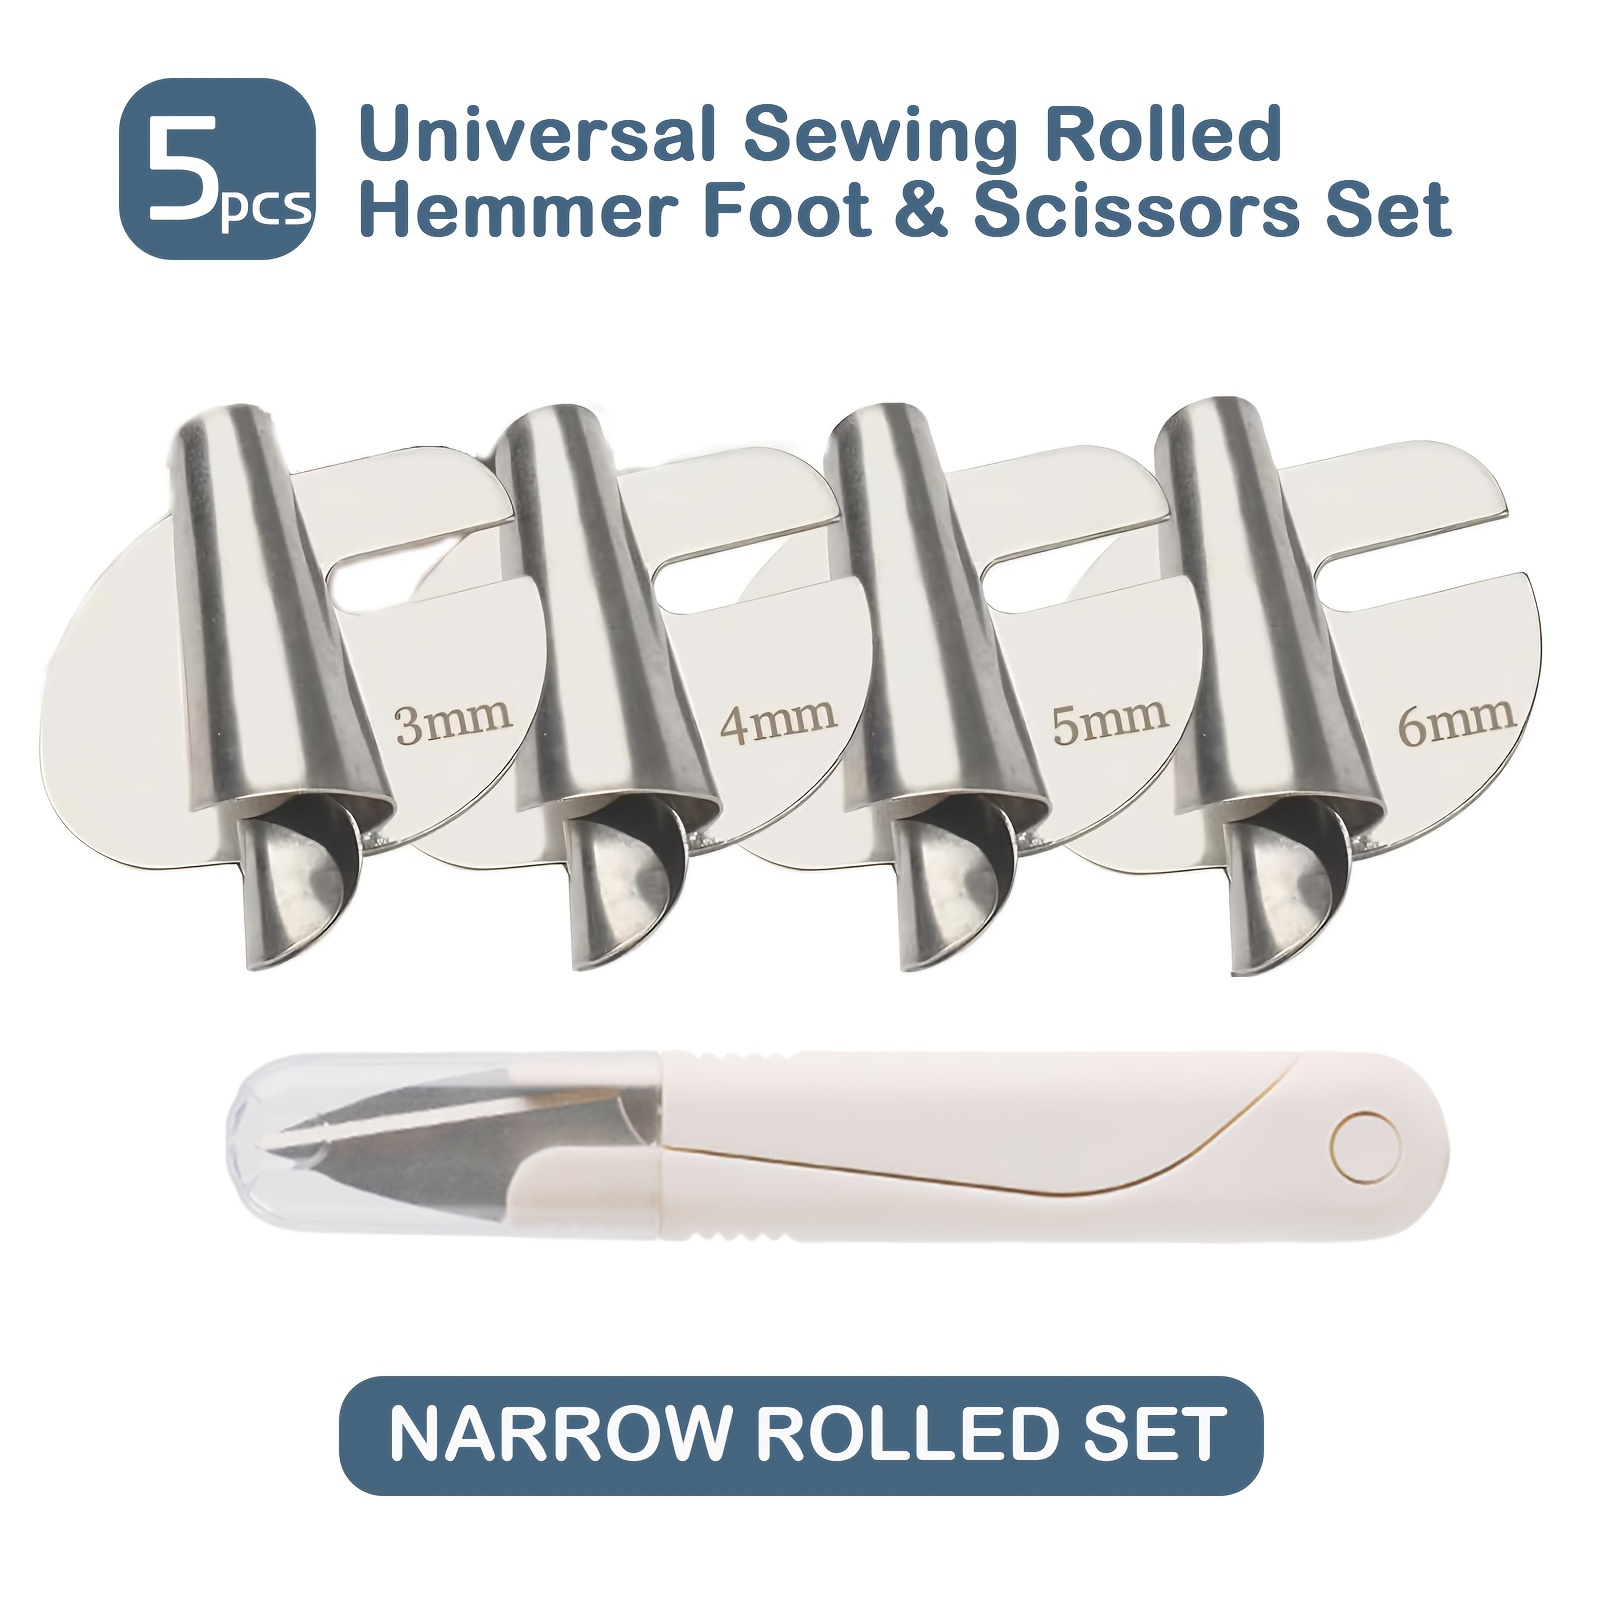 2023 Sewing Rolled Hemmer Foot, Universal Sewing Rolled Hemmer Foot Set,  Sewing Machine Rolled Hem, Rolled Hem Foot, Sewing Rolled Hemmer Foot with  8